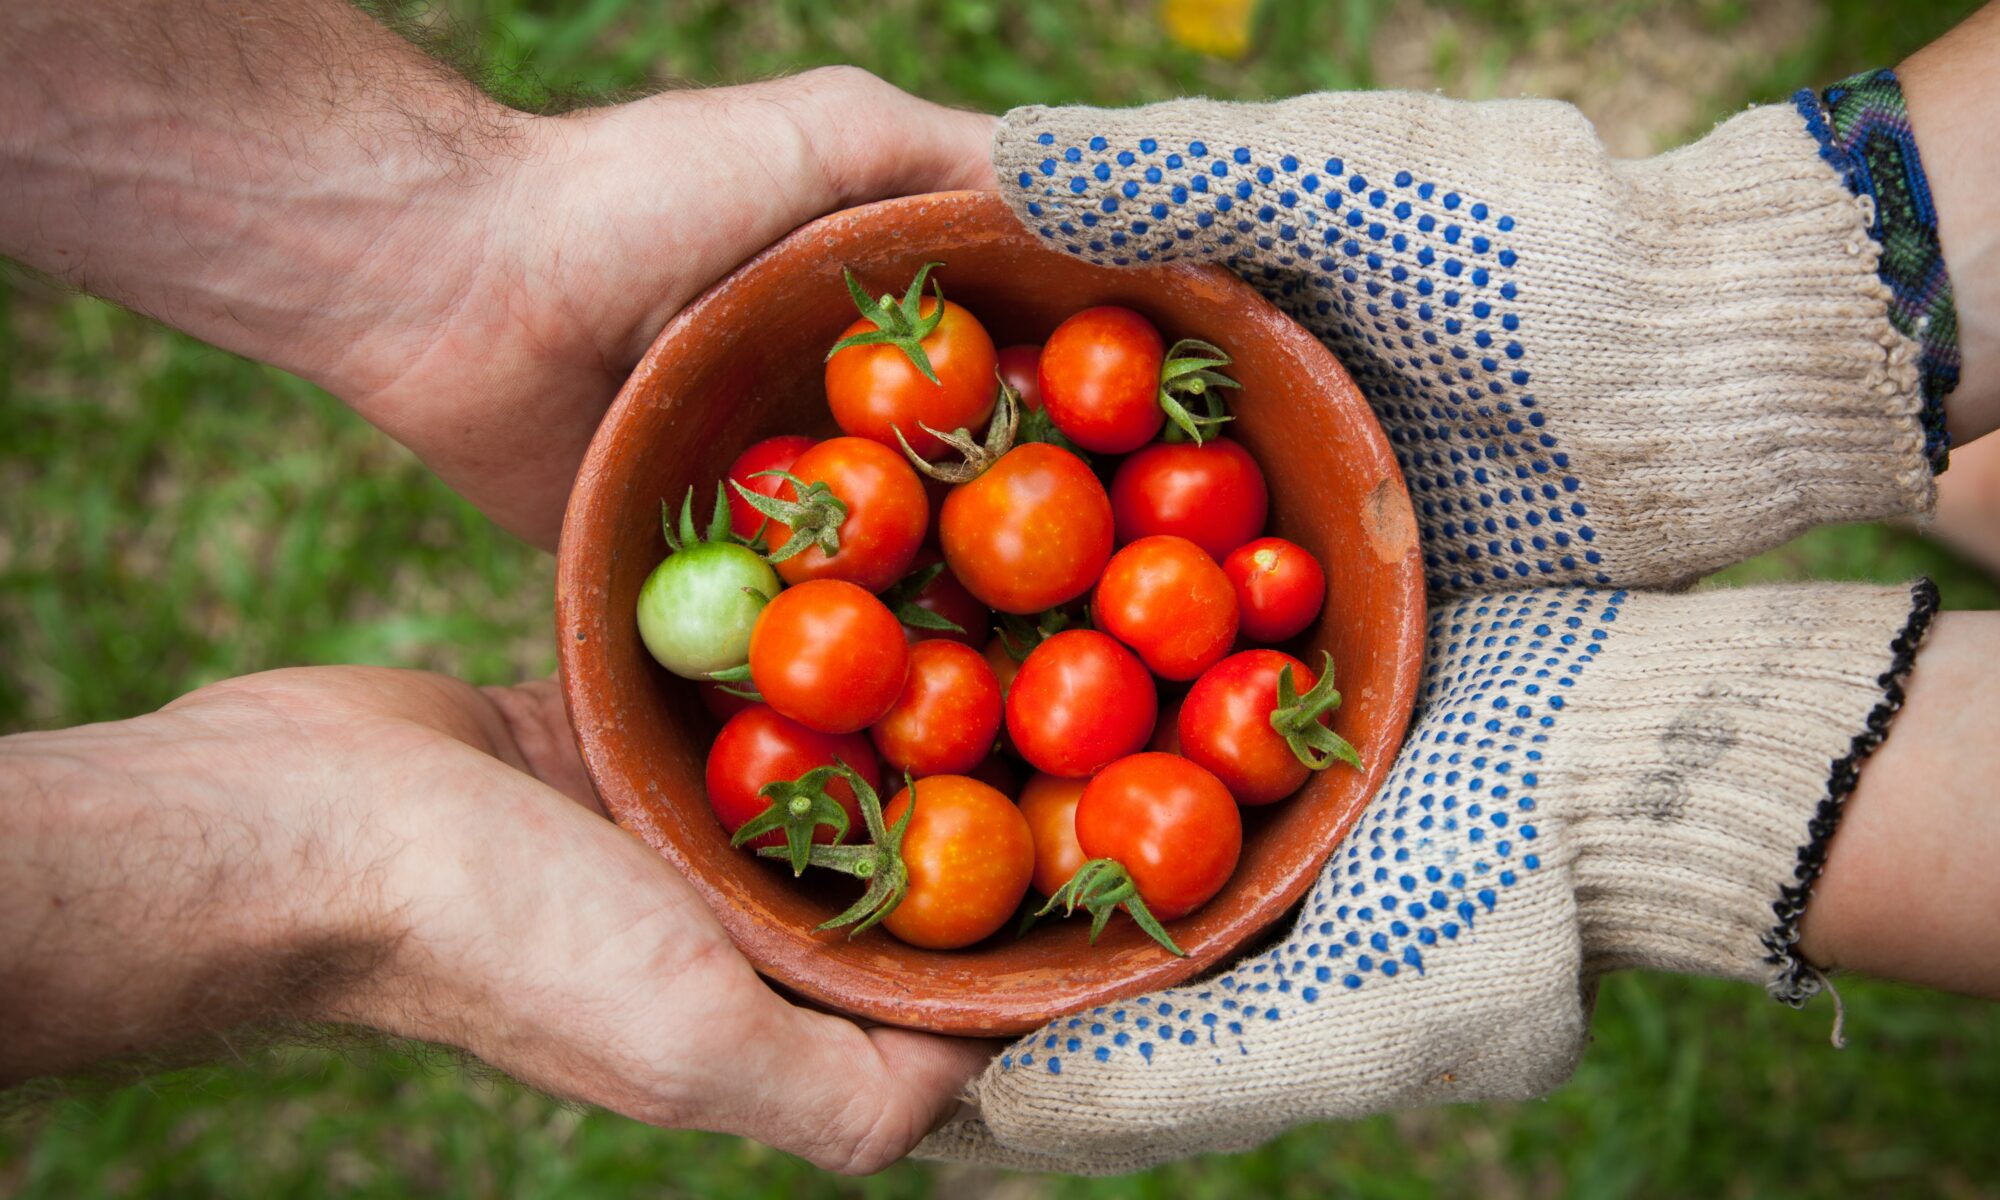 two sets of hands holding a bowl of tomatoes image a